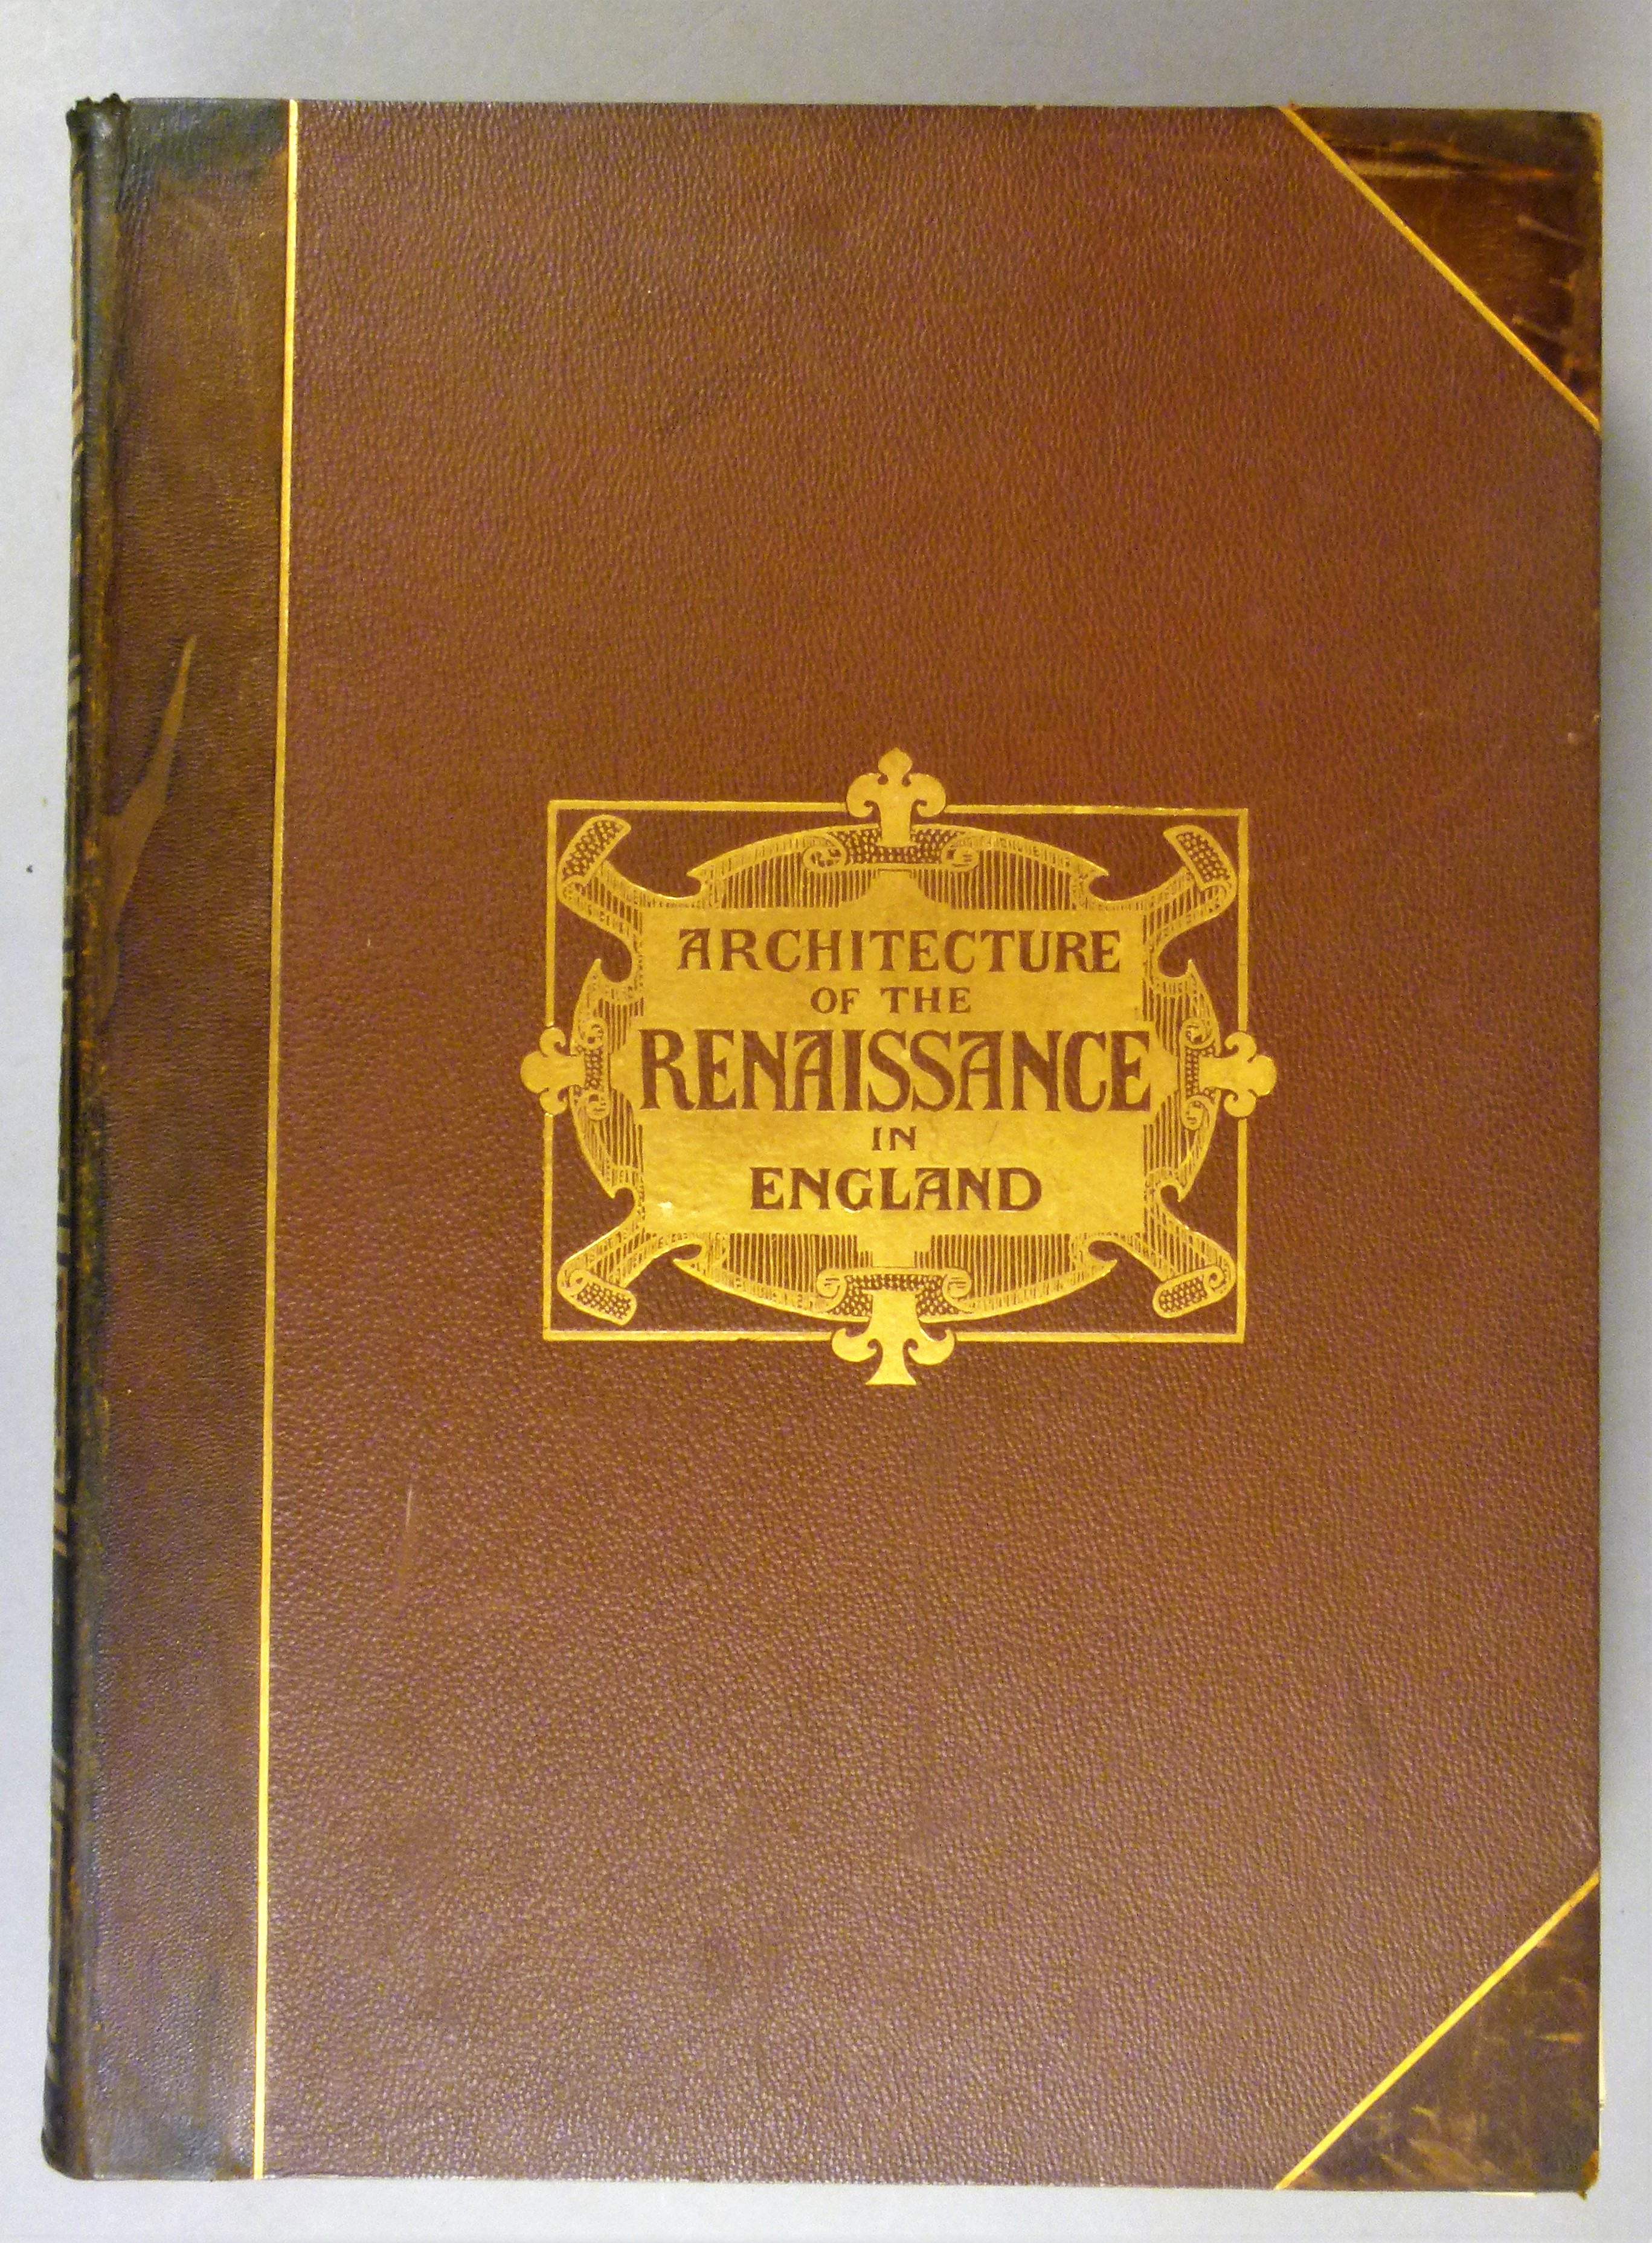 Gotch (John Alfred), ARCHITECTURE OF THE RENAISSANCE IN ENGLAND, 2 vol.